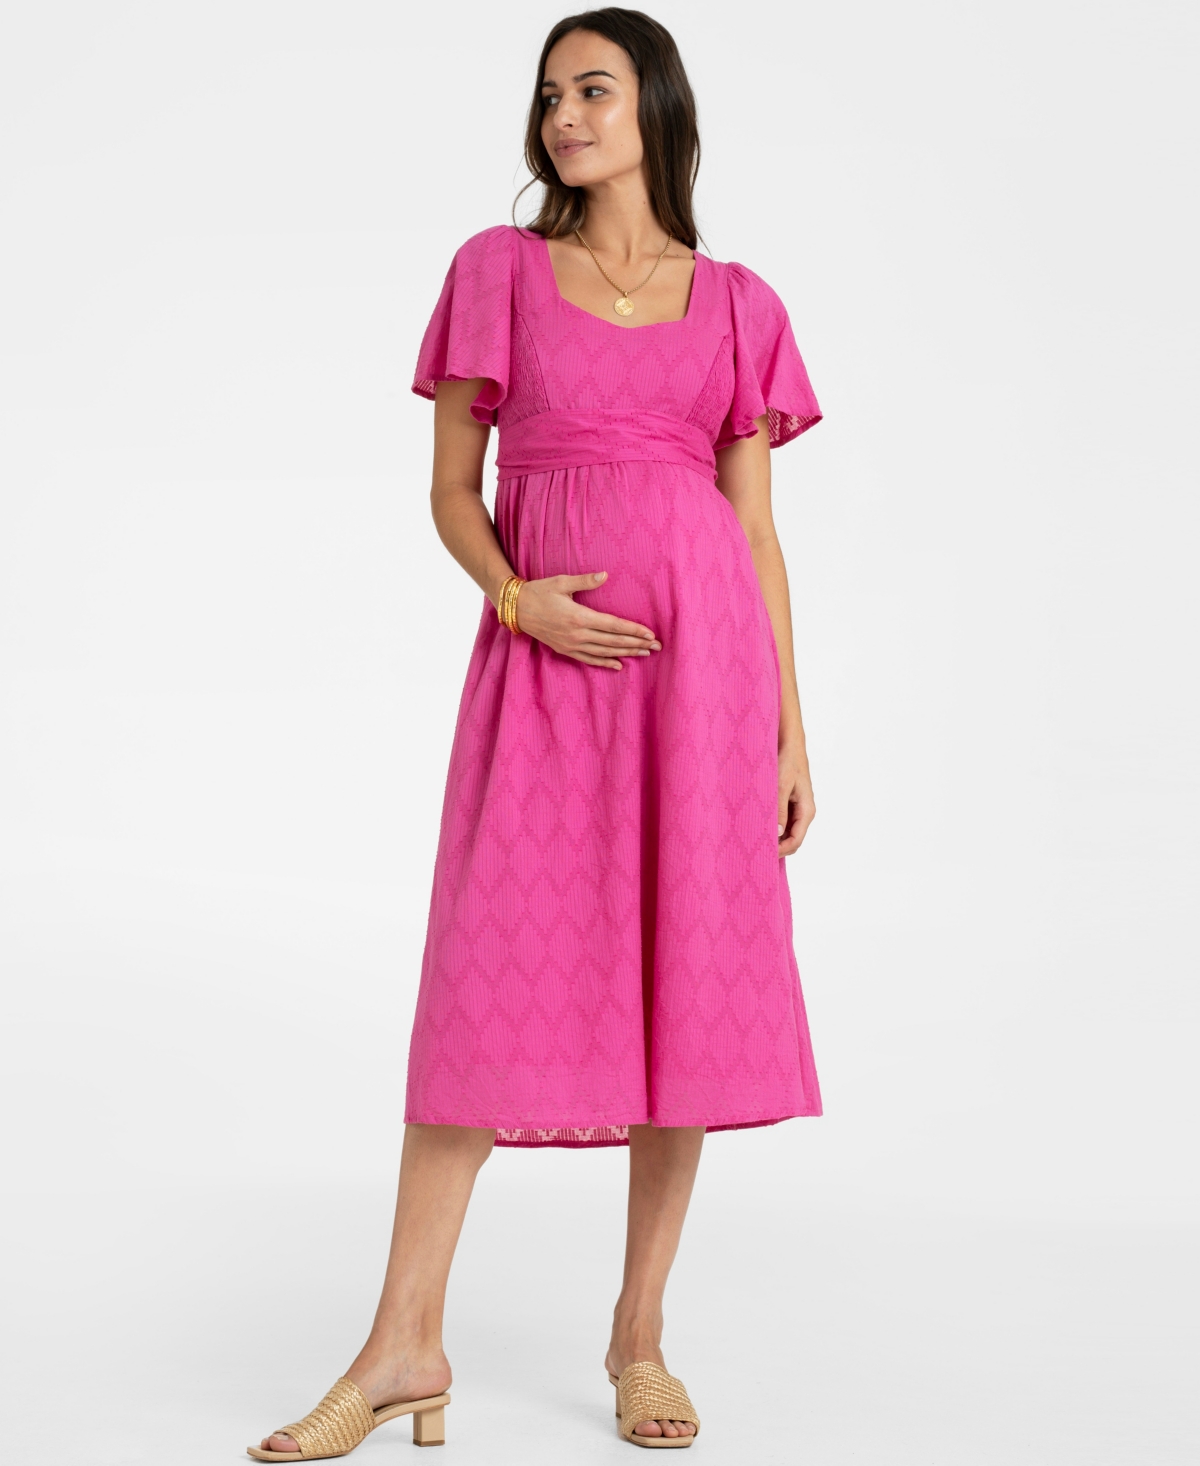 SERAPHINE WOMEN'S COTTON BRODERIE MATERNITY AND NURSING DRESS